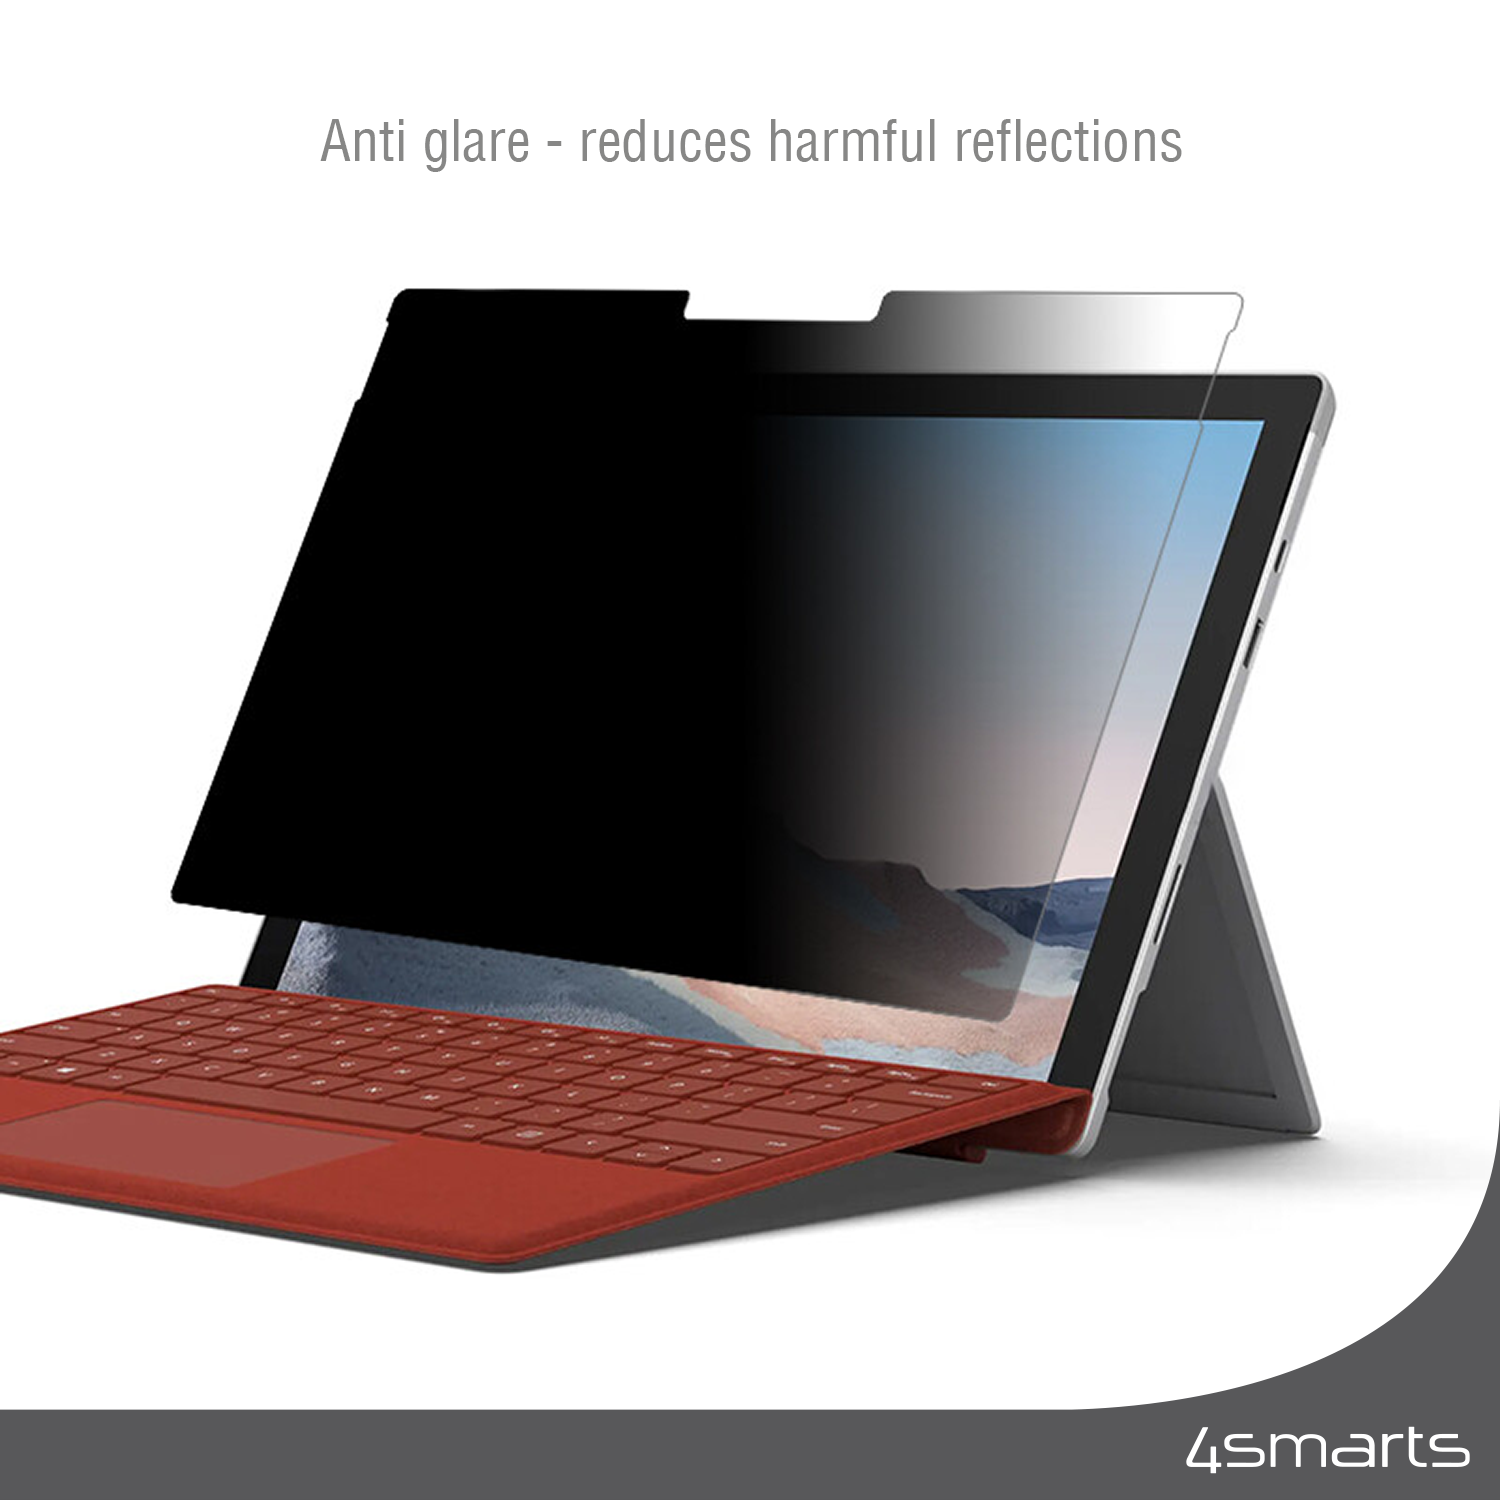 With 4smarts privacy screen protection your tablet display is also effectively protected from scratches and smudges.